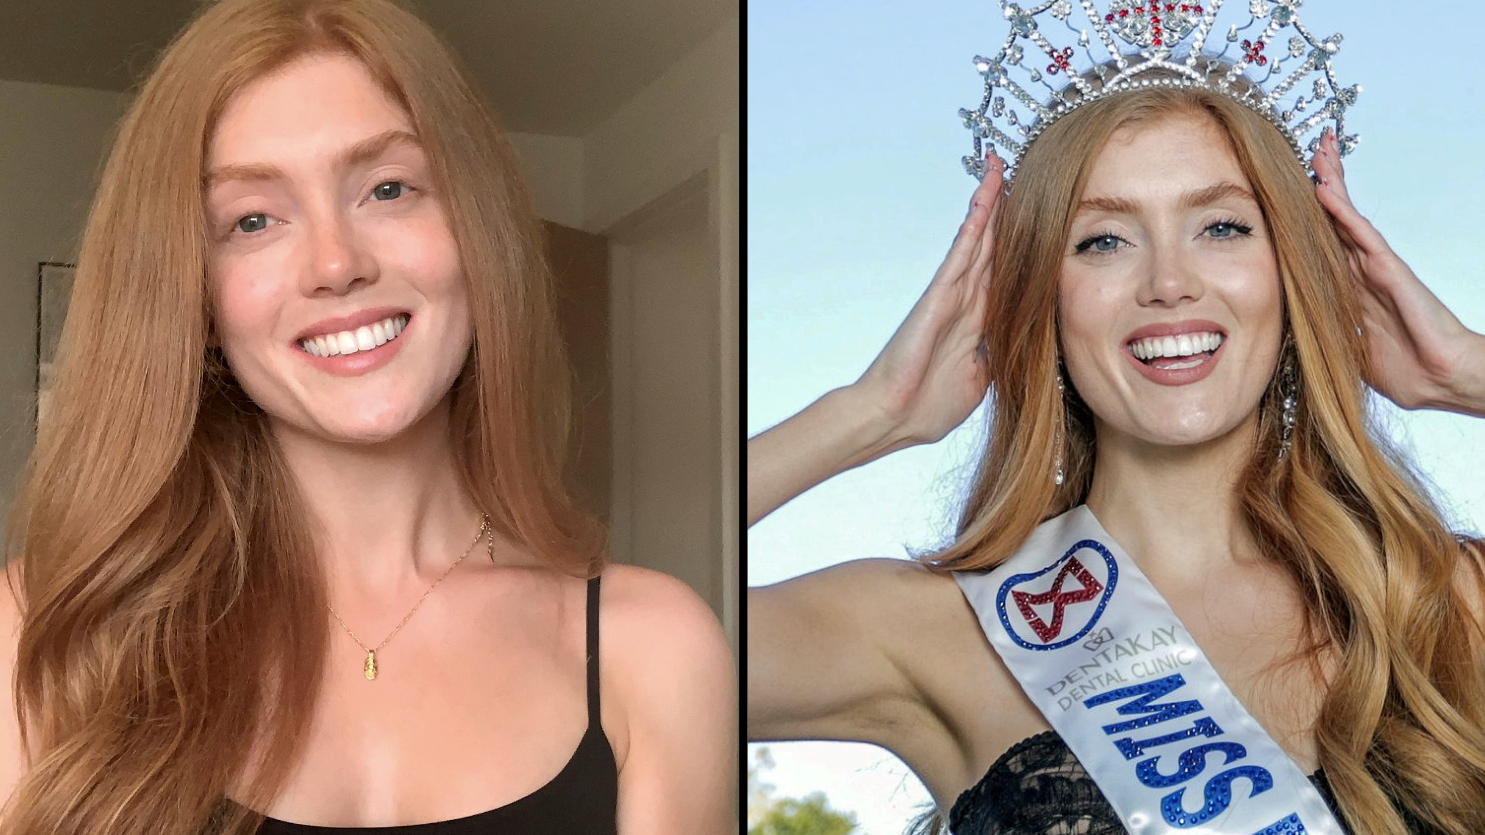 Woman wins world's first make-up-free beauty pageant